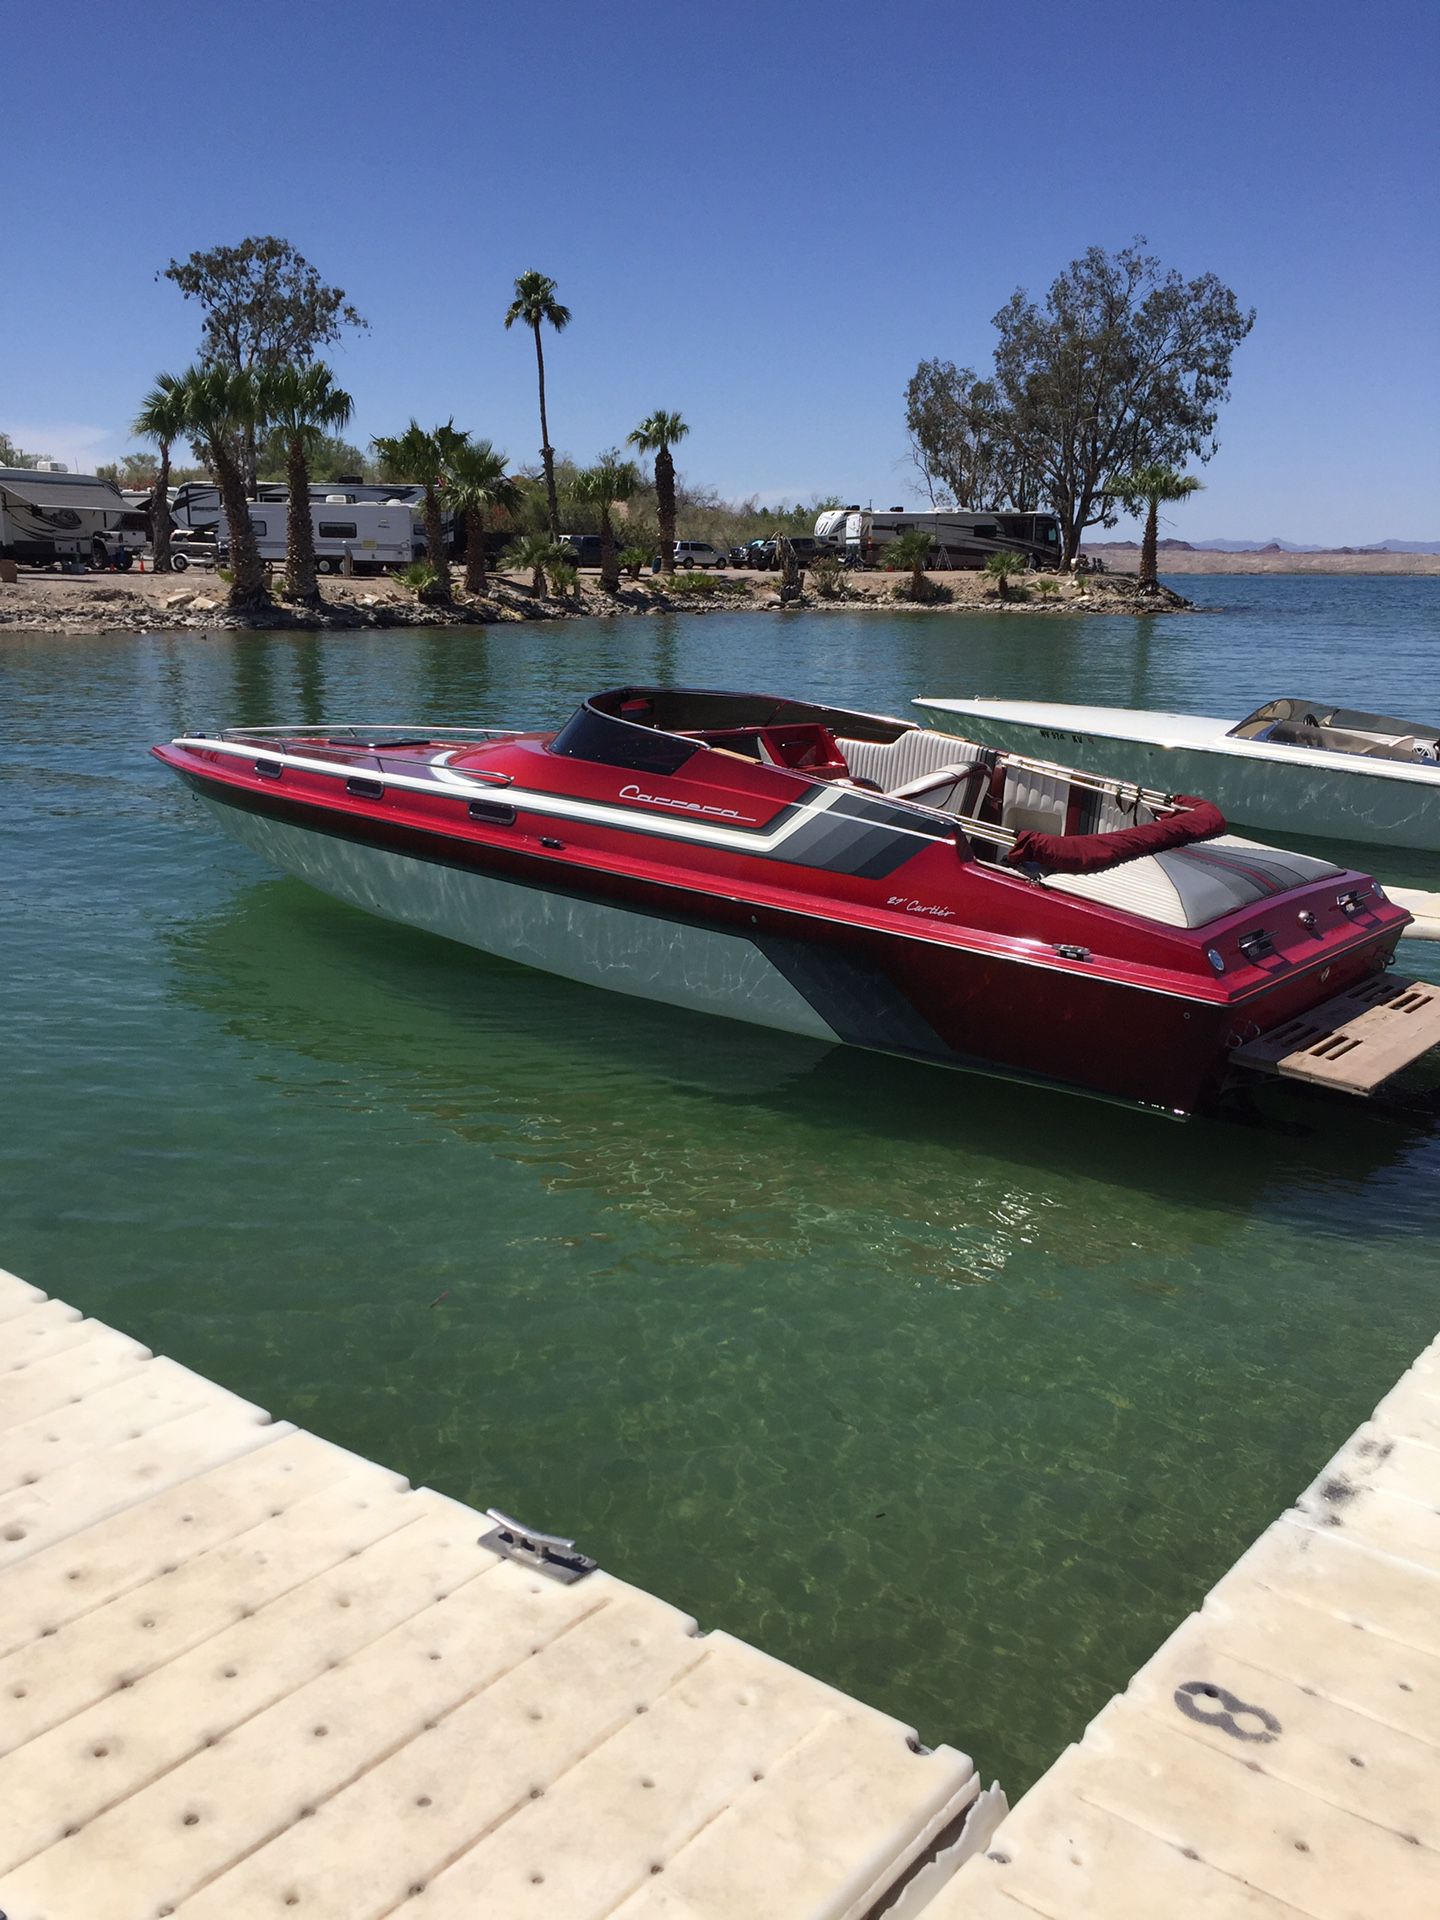 1989 carrera Cartier 27ft for Sale in Cave Creek, AZ - OfferUp